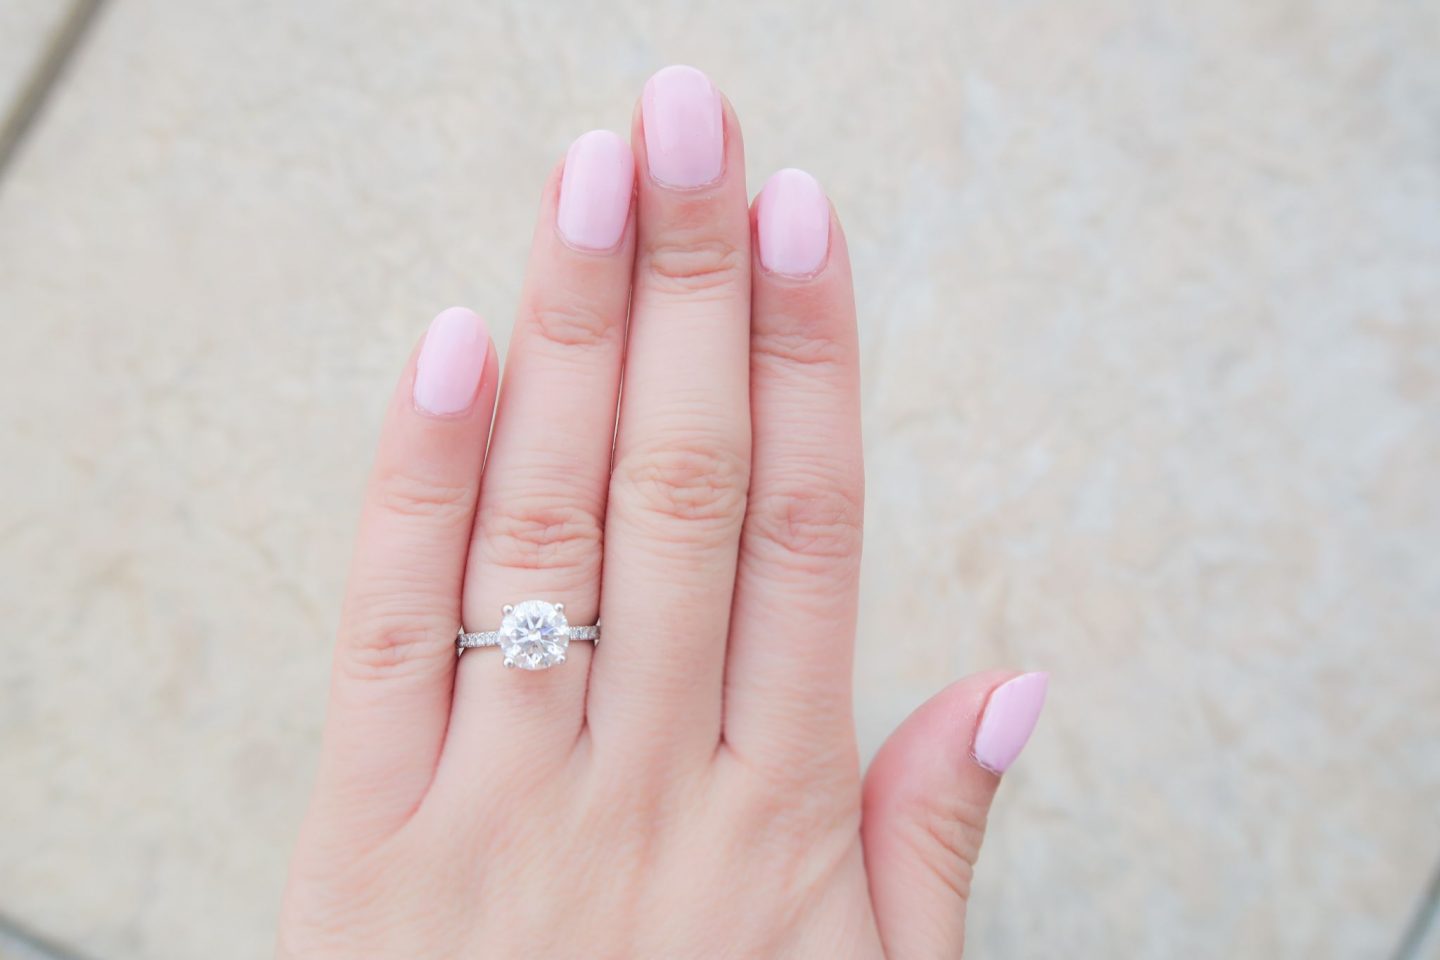 6. Nail Colors That Make Your Engagement Ring Pop - wide 8